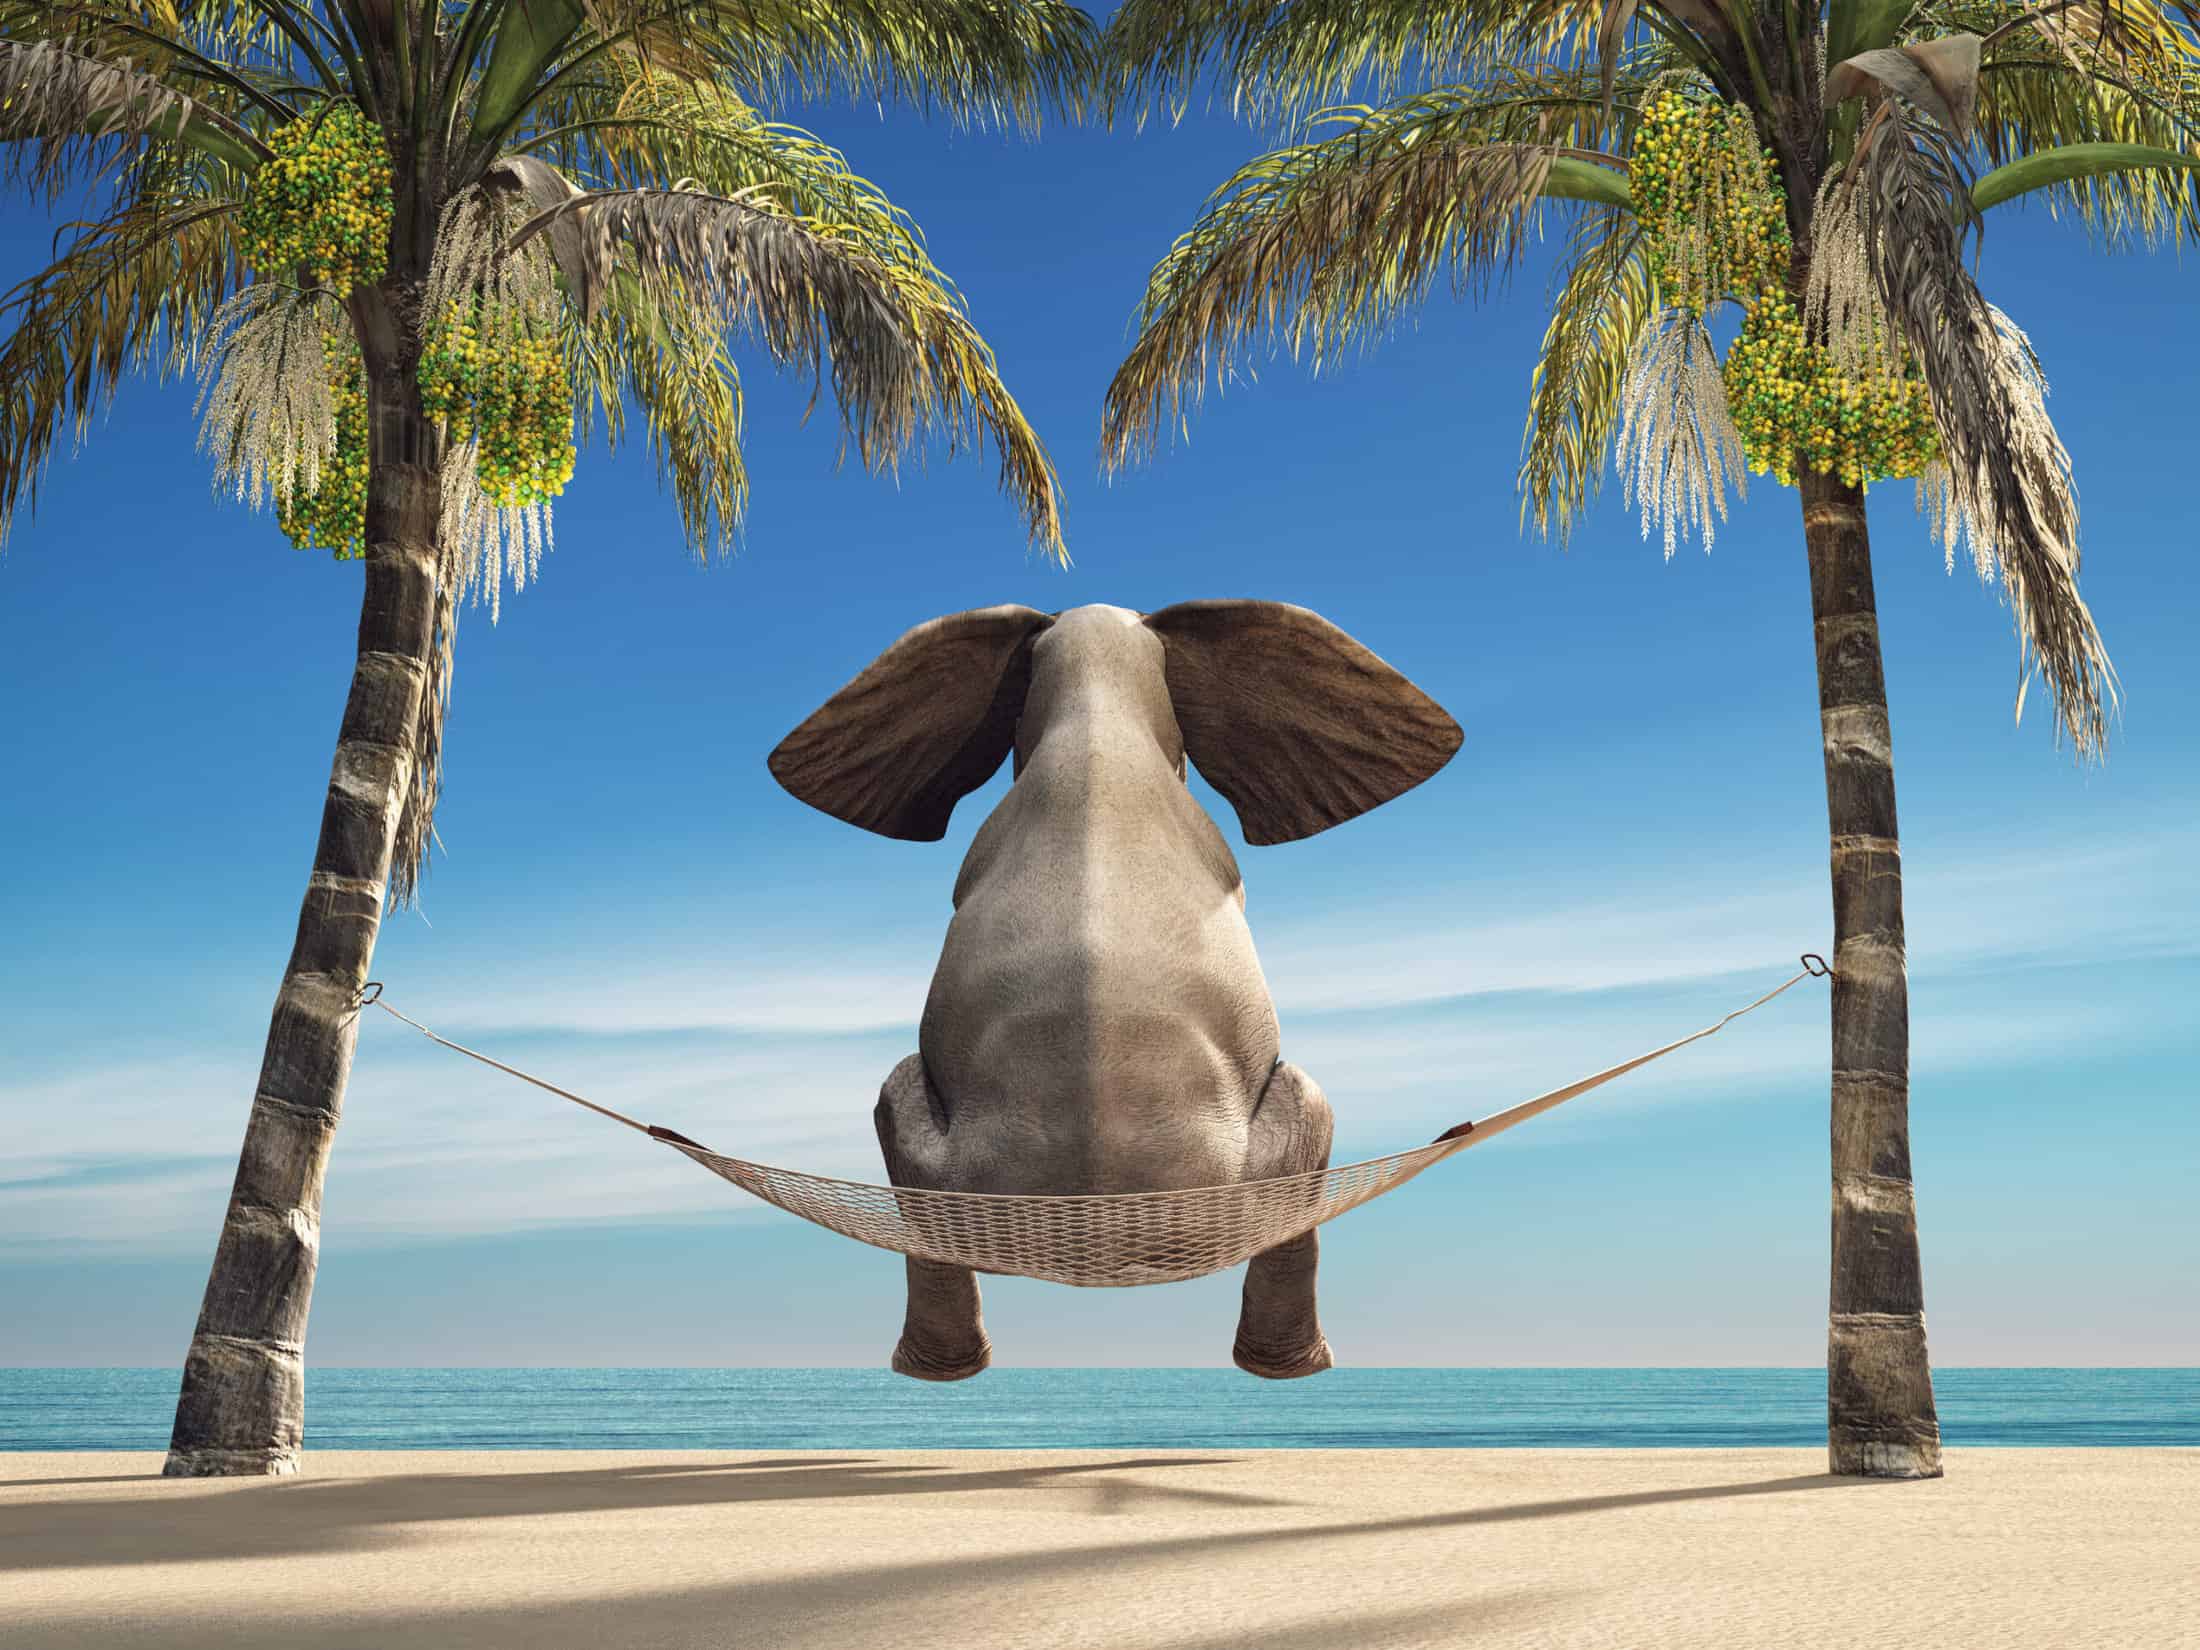 An elephant sitting in a hammock on the beach and look at sea. This is a 3d render illustration